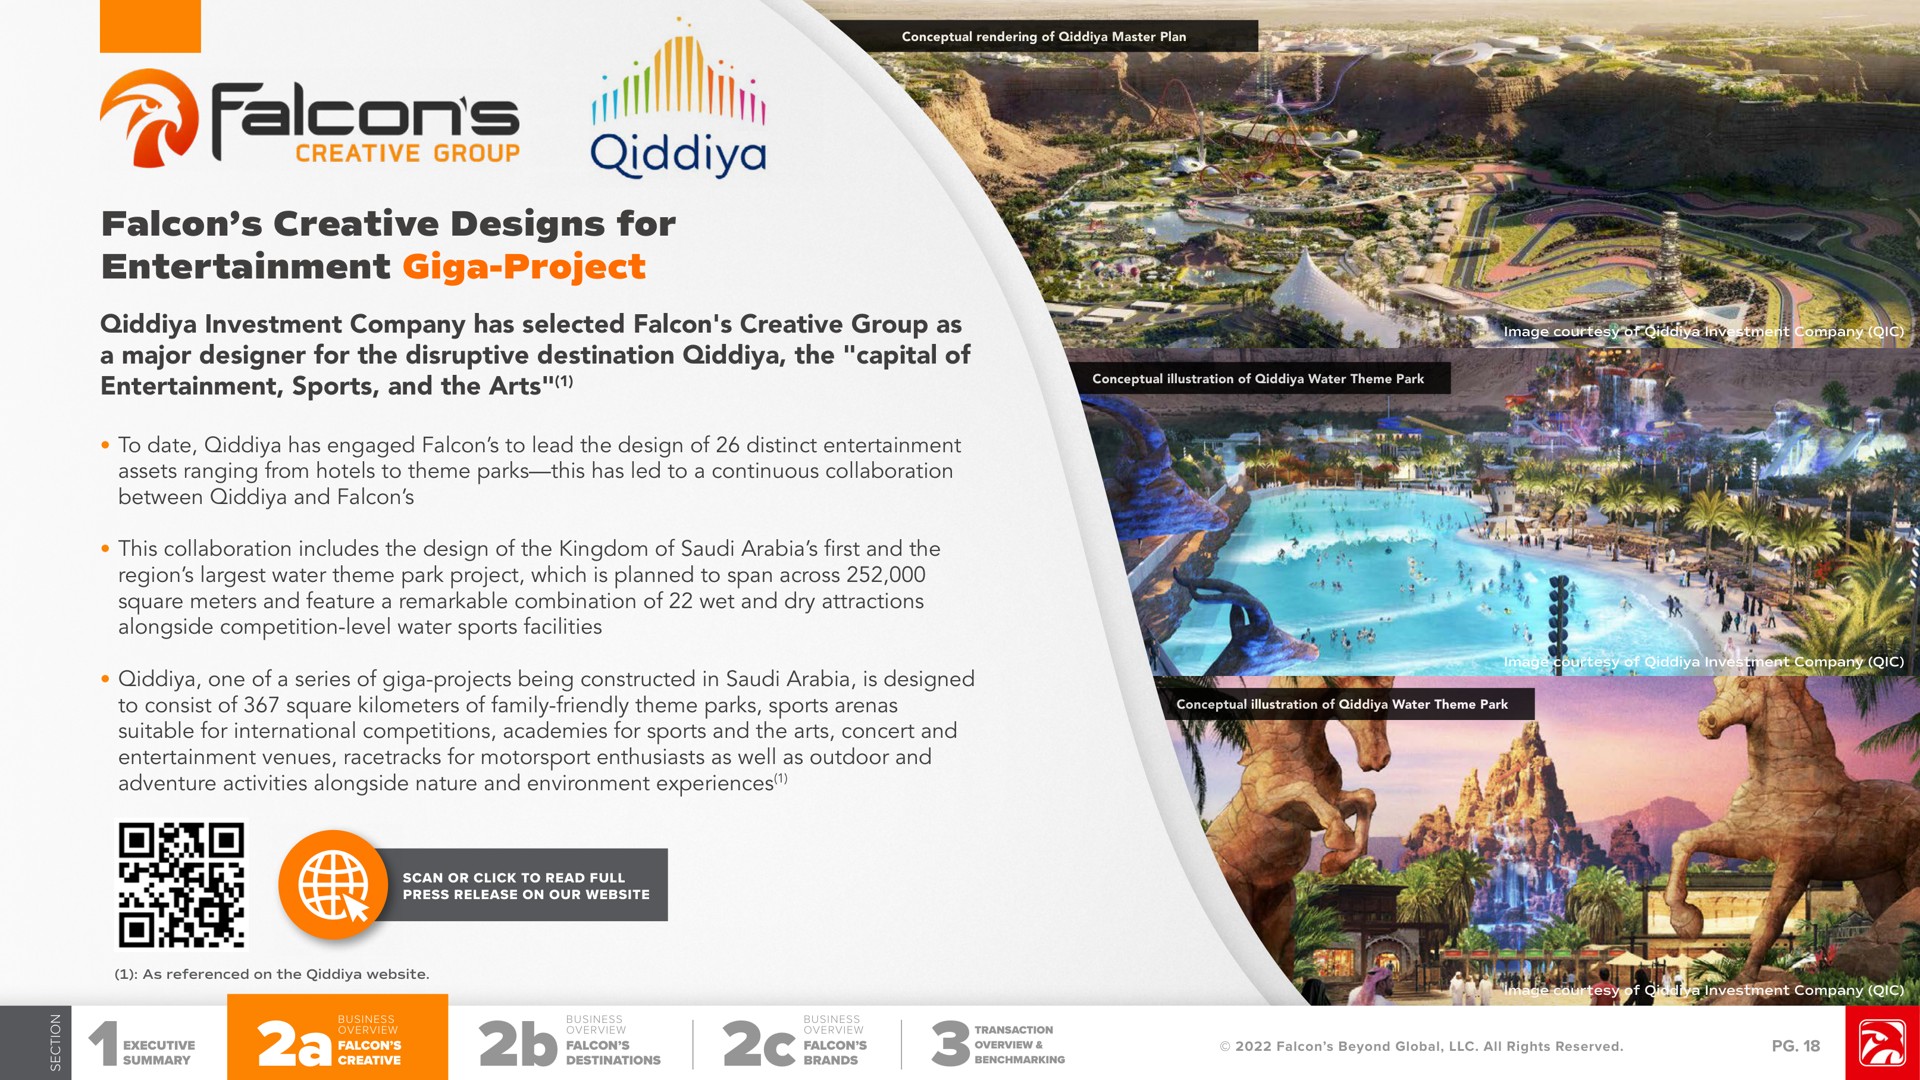 falcon creative designs for entertainment project investment company has selected falcon creative group as a major designer for the disruptive destination the capital of entertainment sports and the arts | Falcon's Beyond